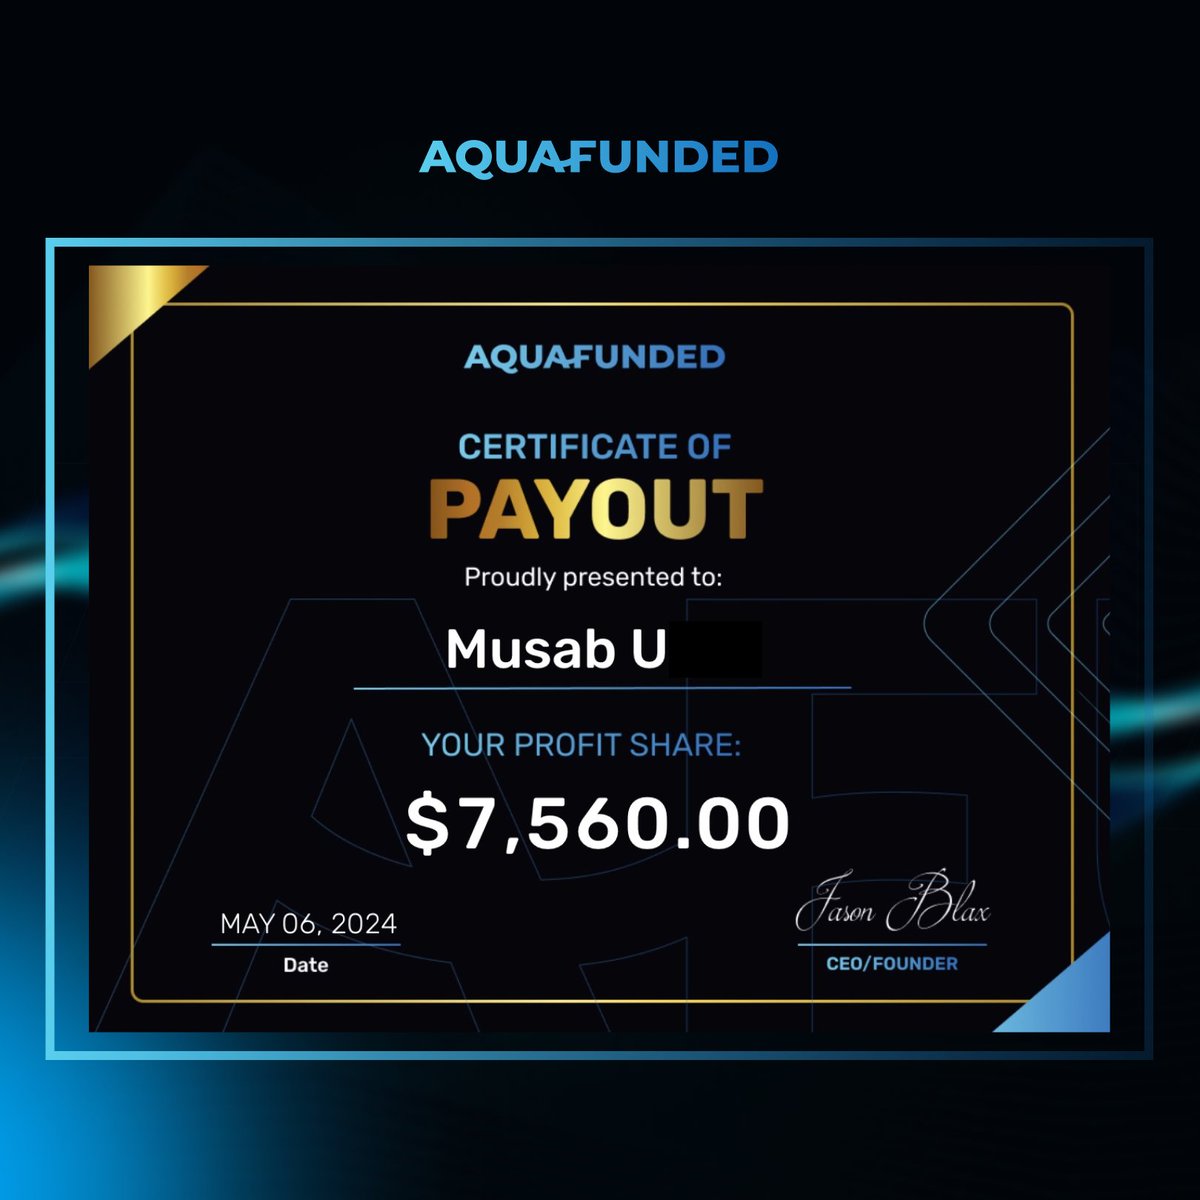 Congratulations to Musab on a +$7,500 payout! Making the waves 🌊